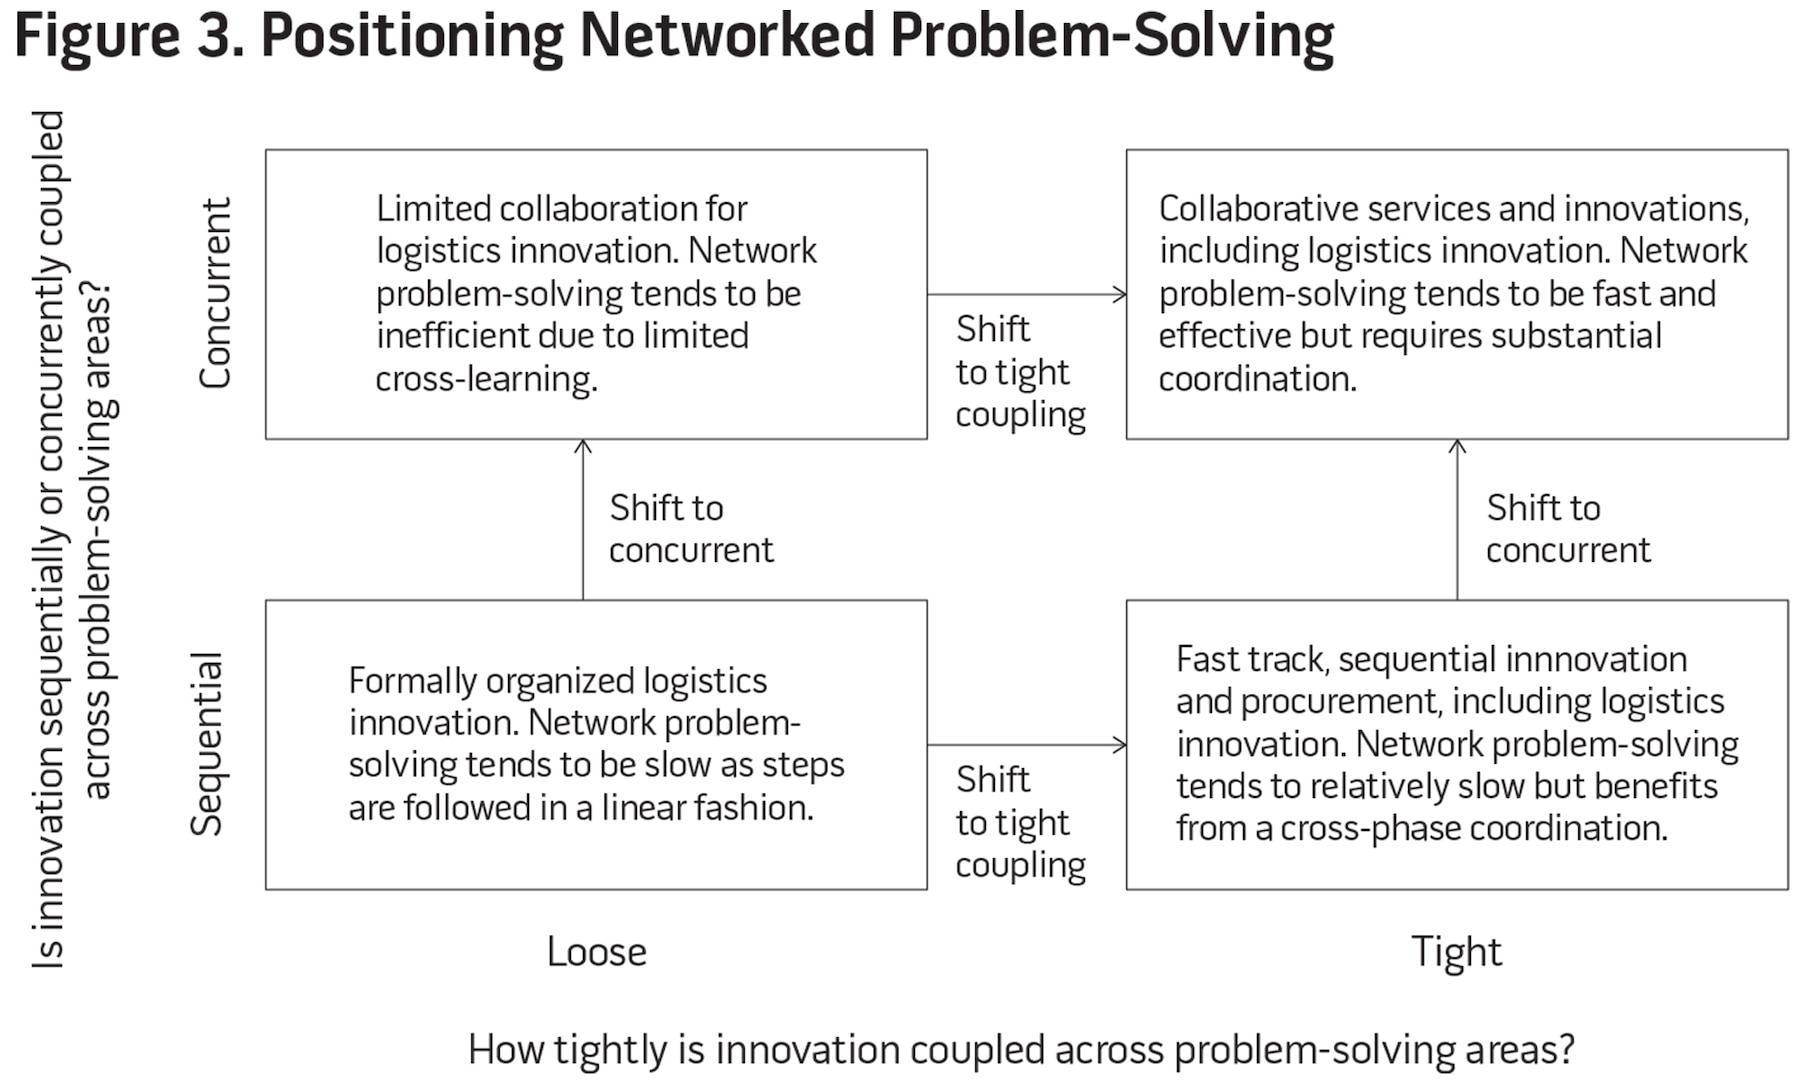 Figure 3. Positioning Networked Problem-Solving